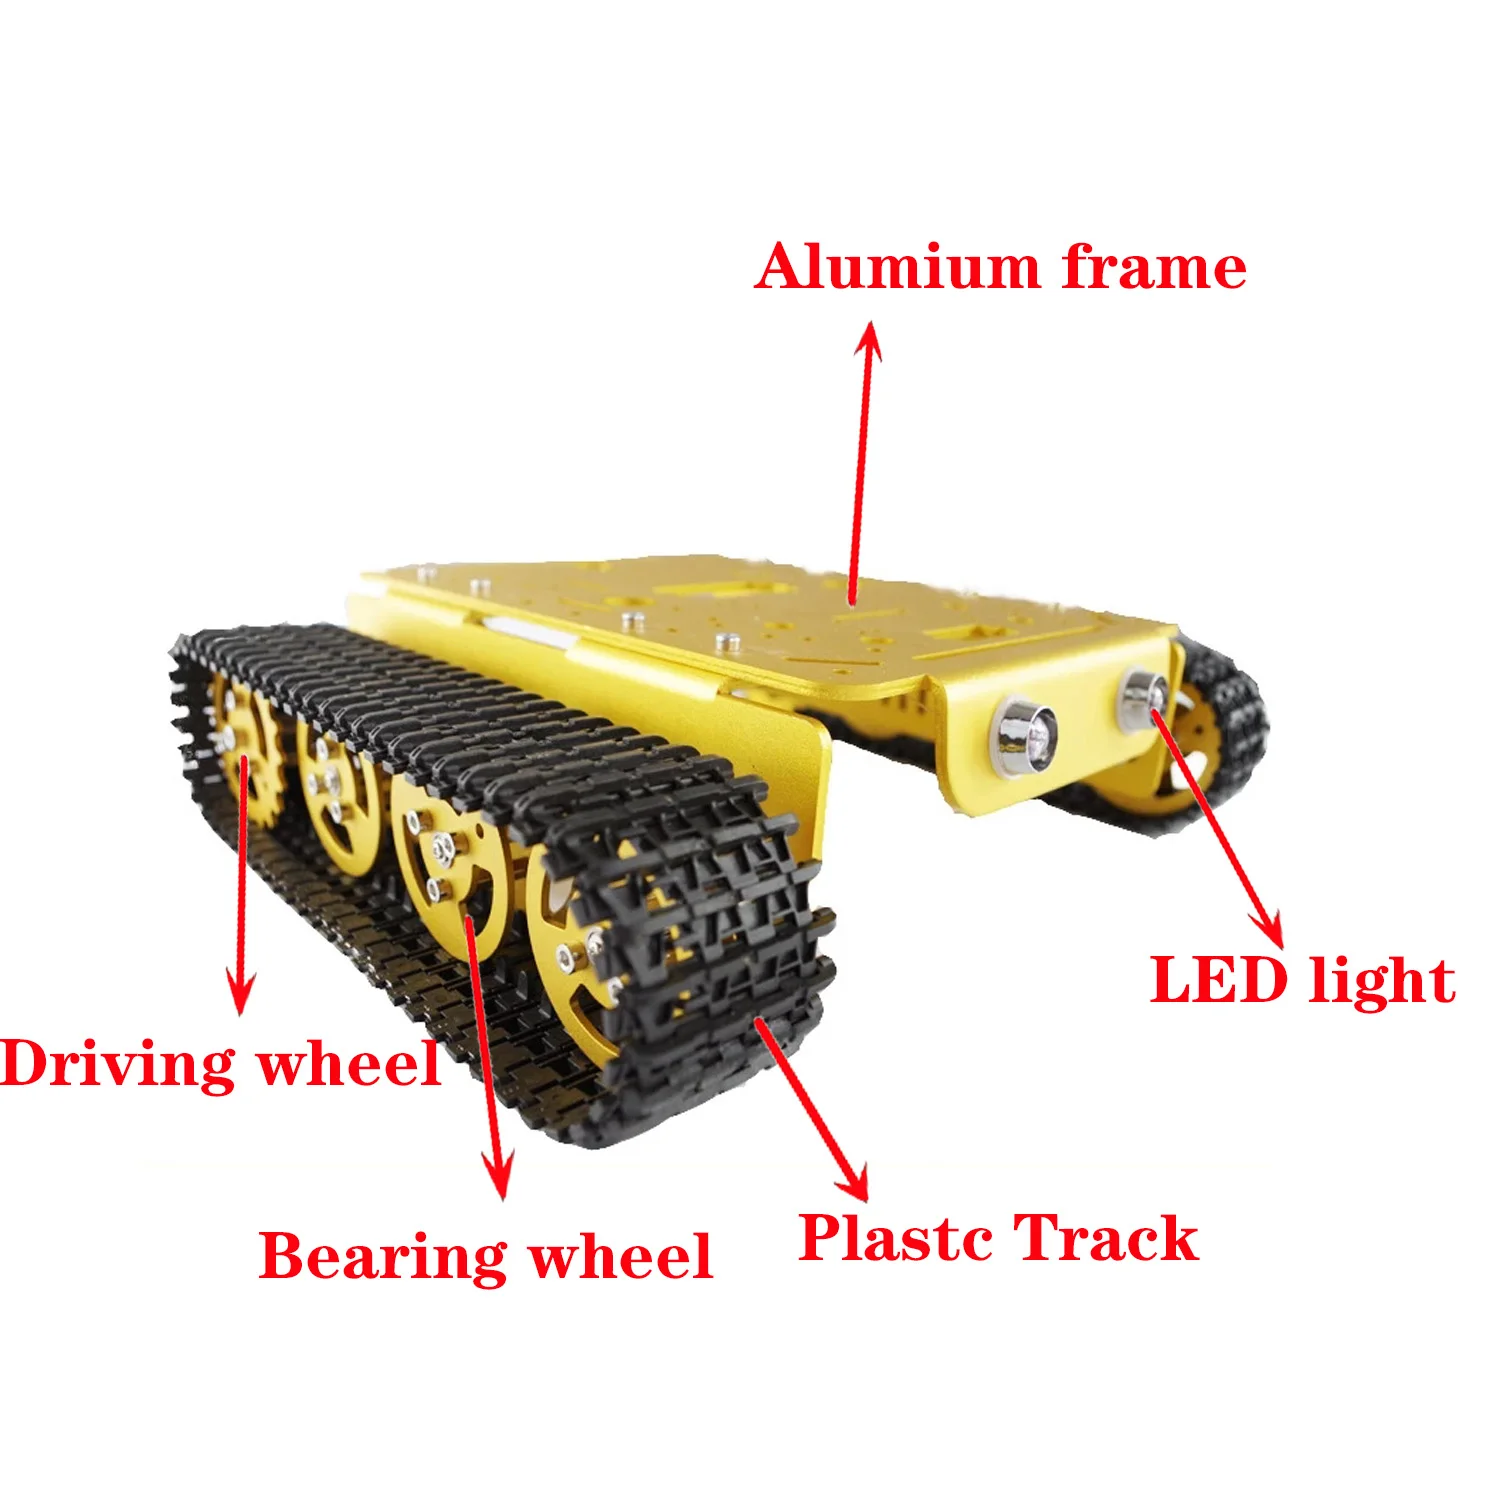 TD200 Double Caterpillar Heavy Metal Tank Chassis Robot Model Intelligent Car Electronic Contest enlarge